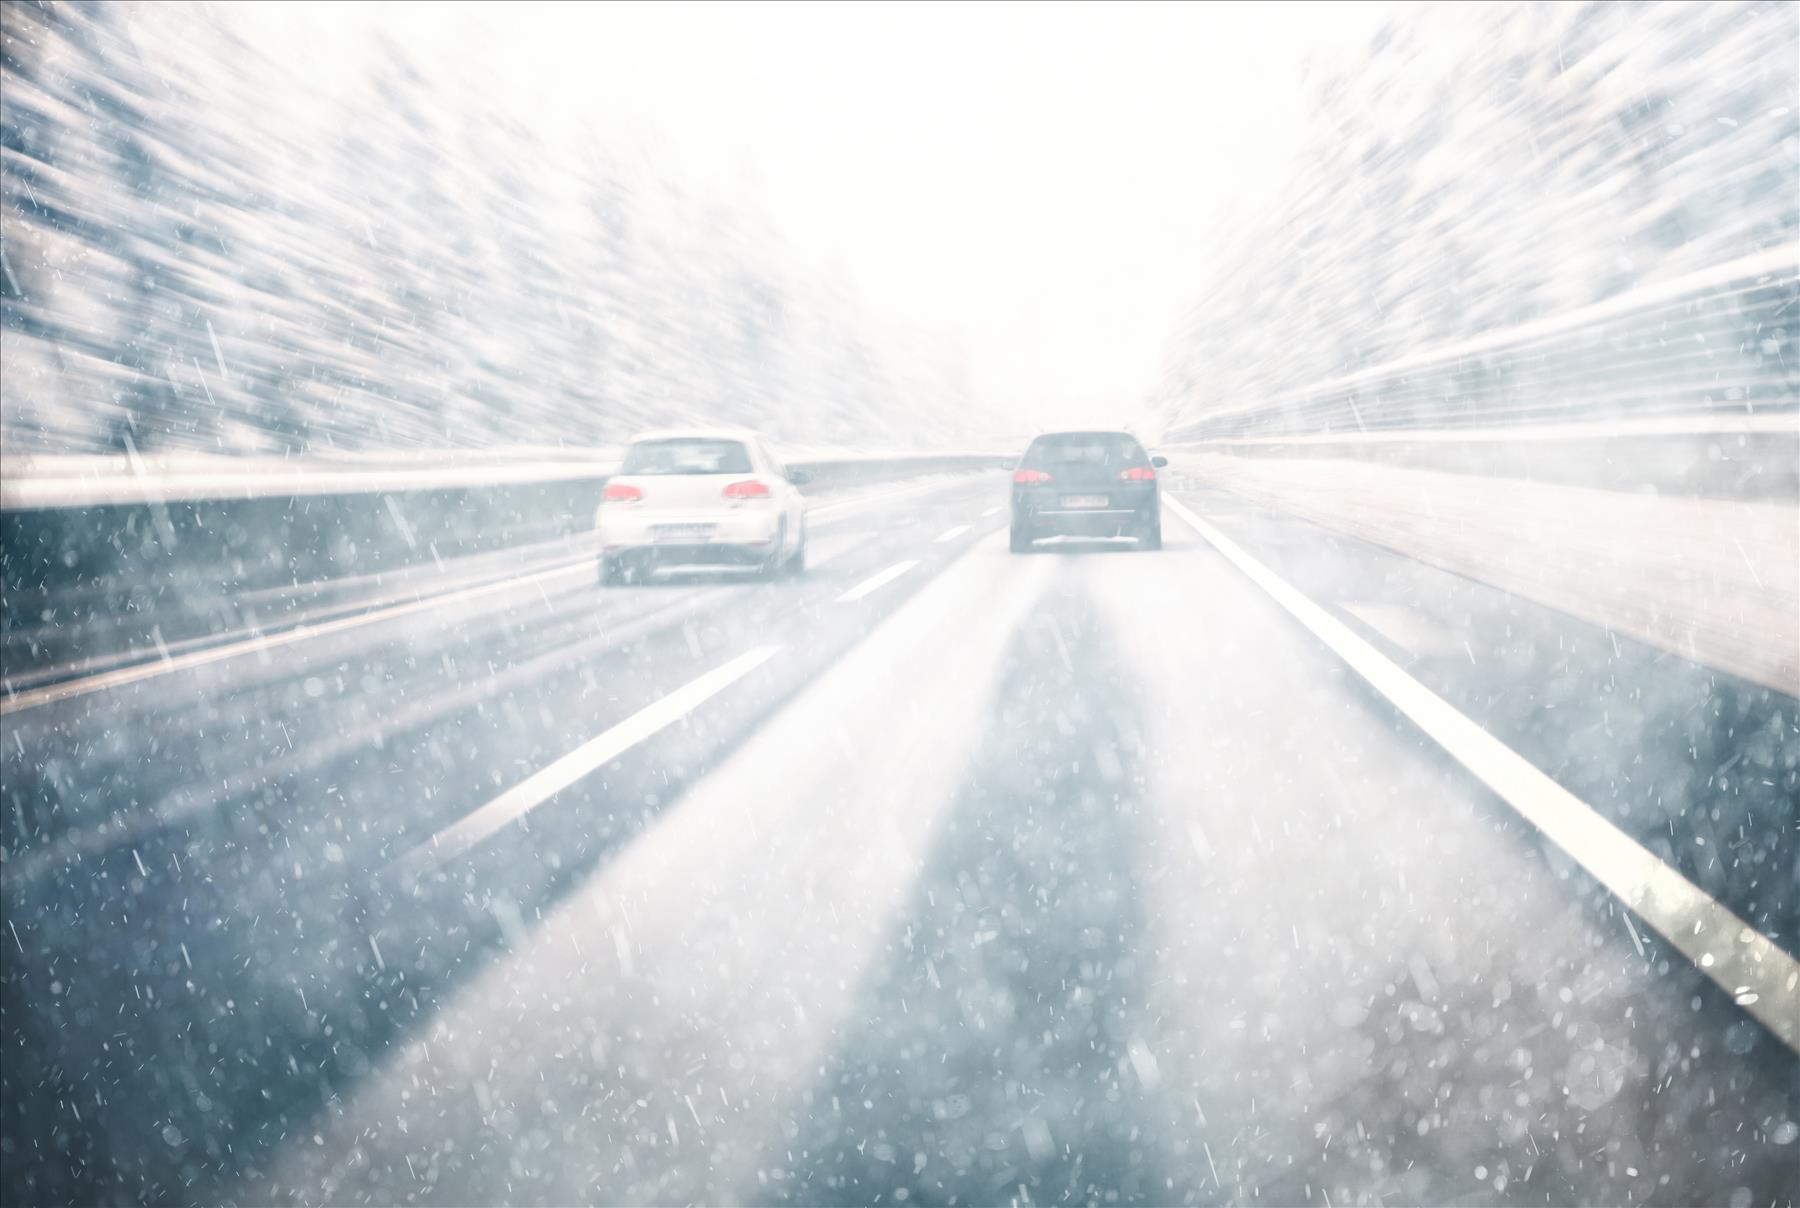 Driving in Heavy Snowfall and Contacting a Personal Injury Law Firm if an Accident Occurs